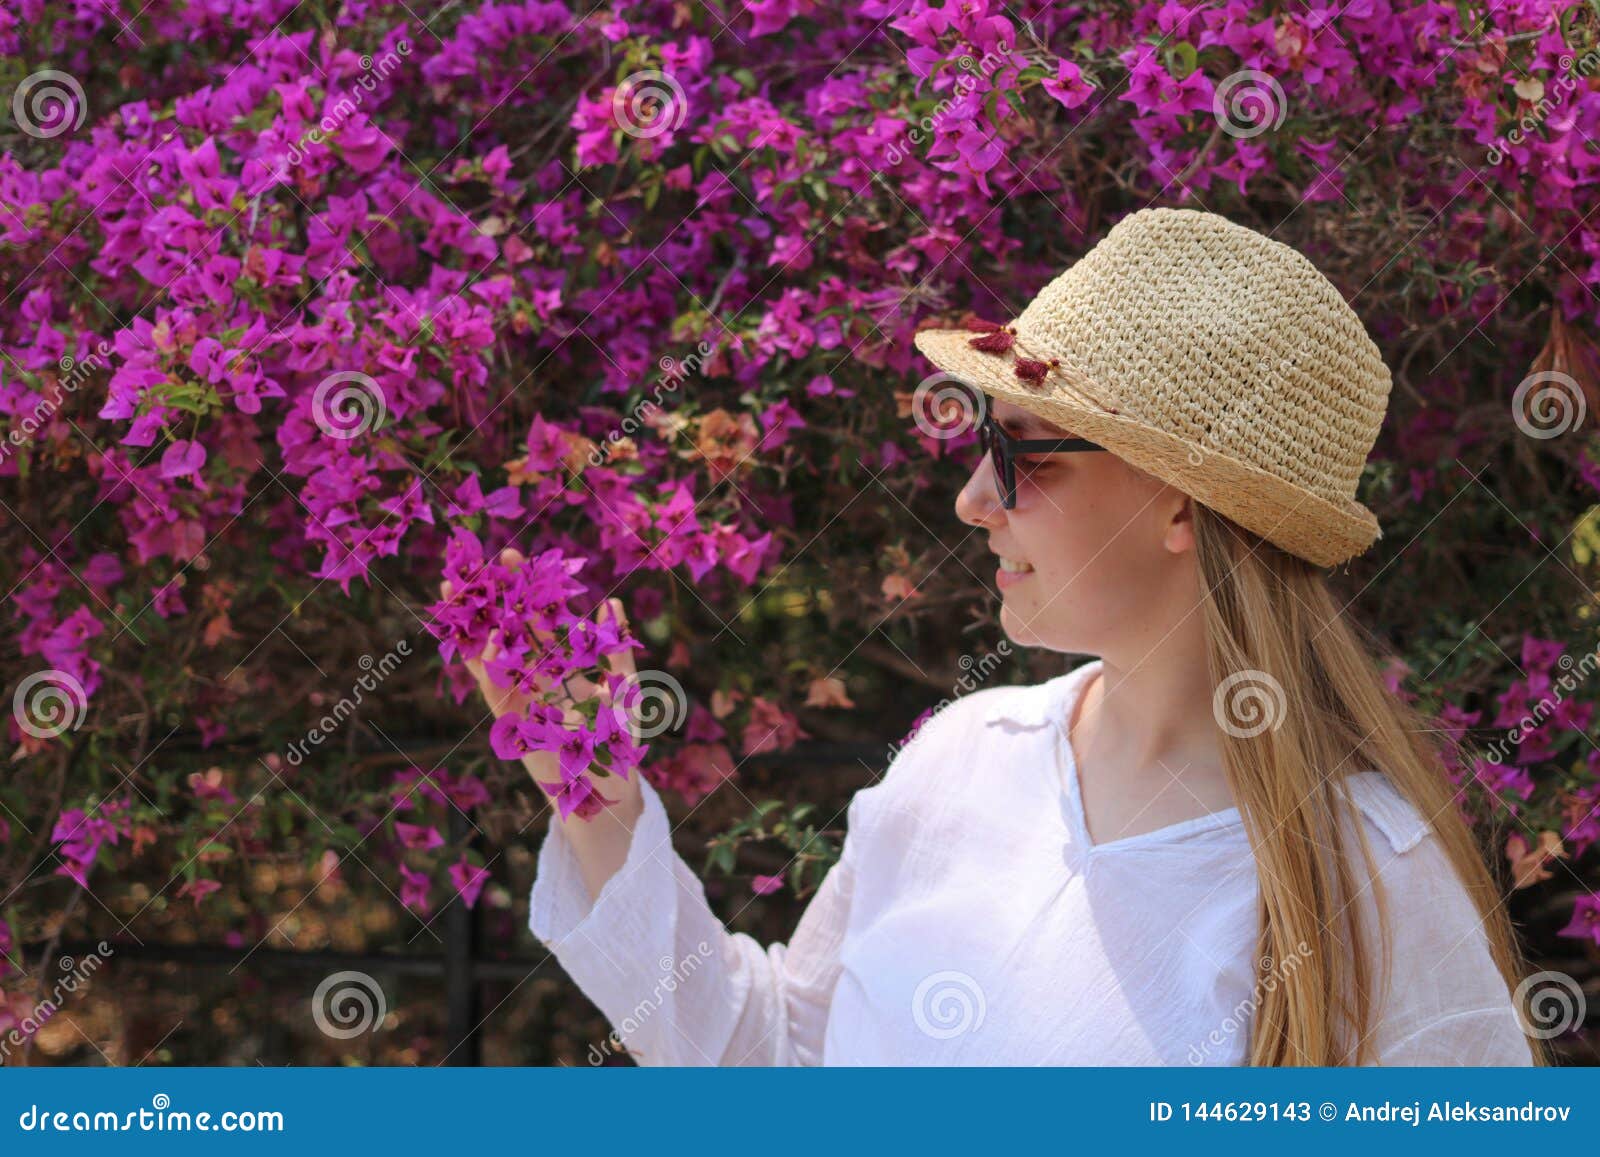 Blonde Girl Posing and Watching Bougainvillea Stock Image - Image of ...